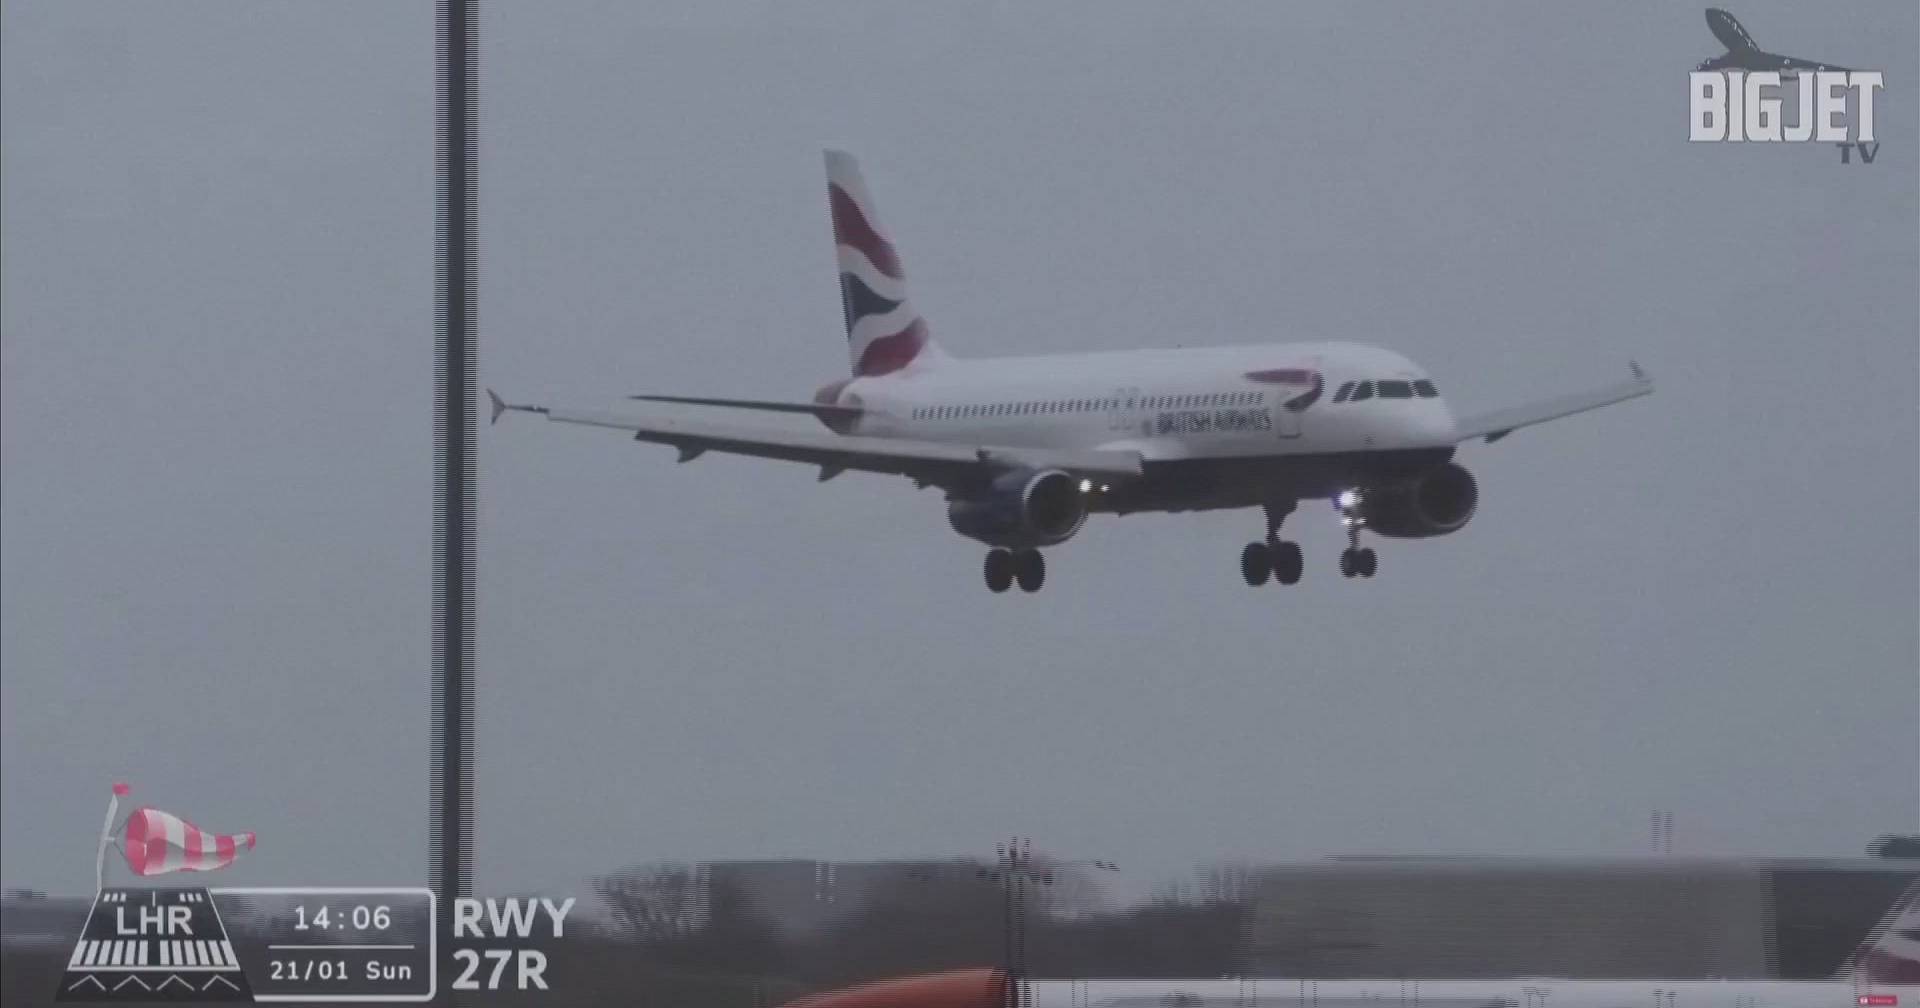 Storm Isha in the United Kingdom: Strong winds prevent landing at Heathrow Airport